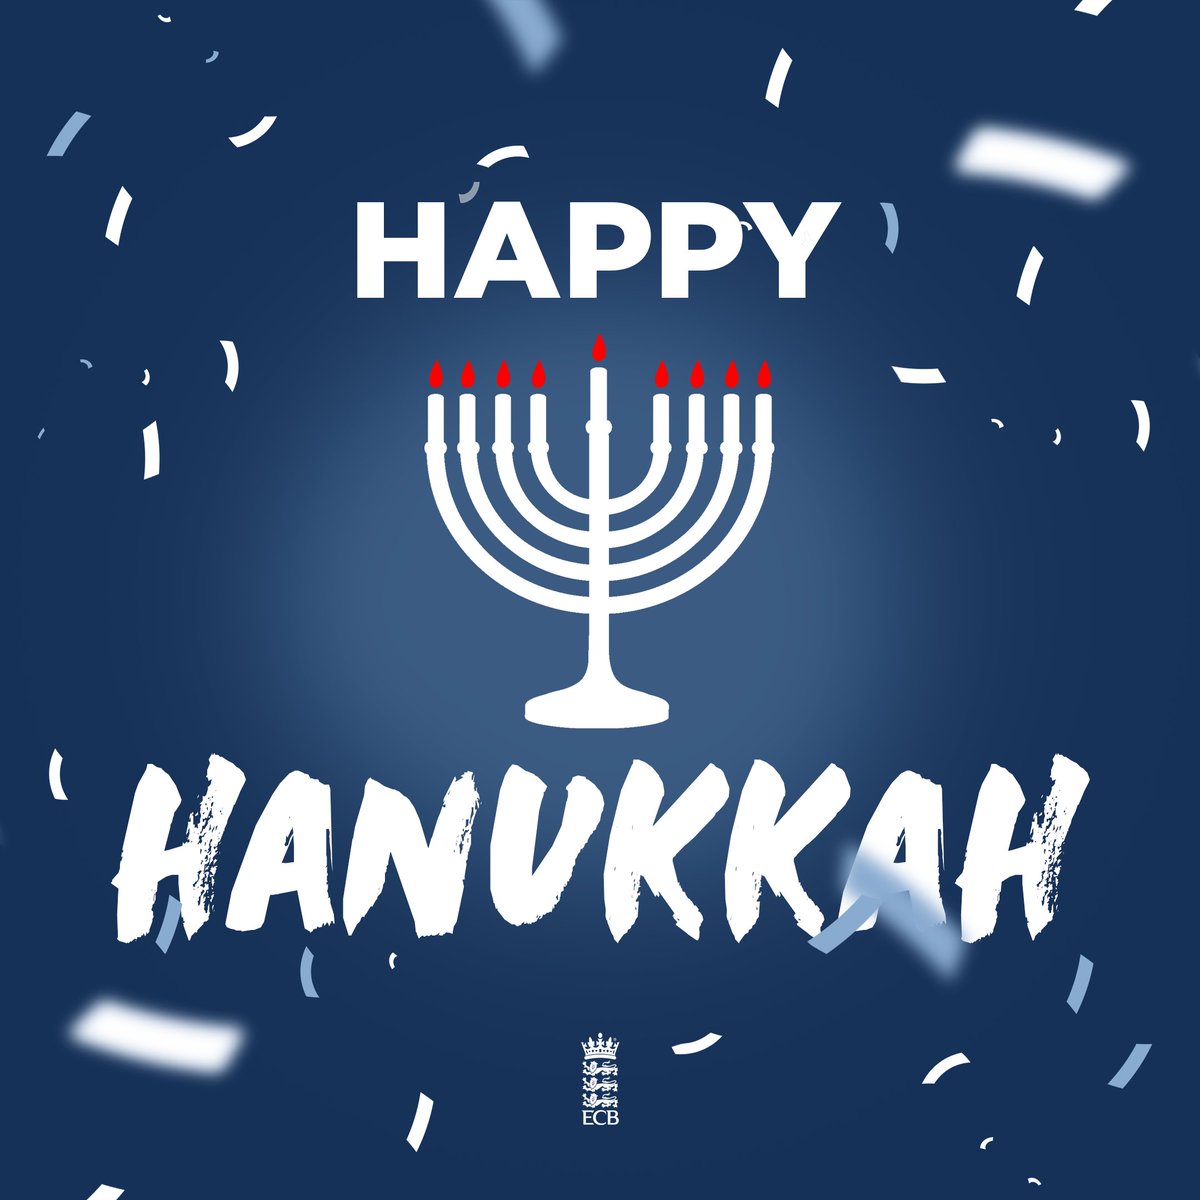 Wishing a happy #Hanukkah to all those celebrating the festival 🕎